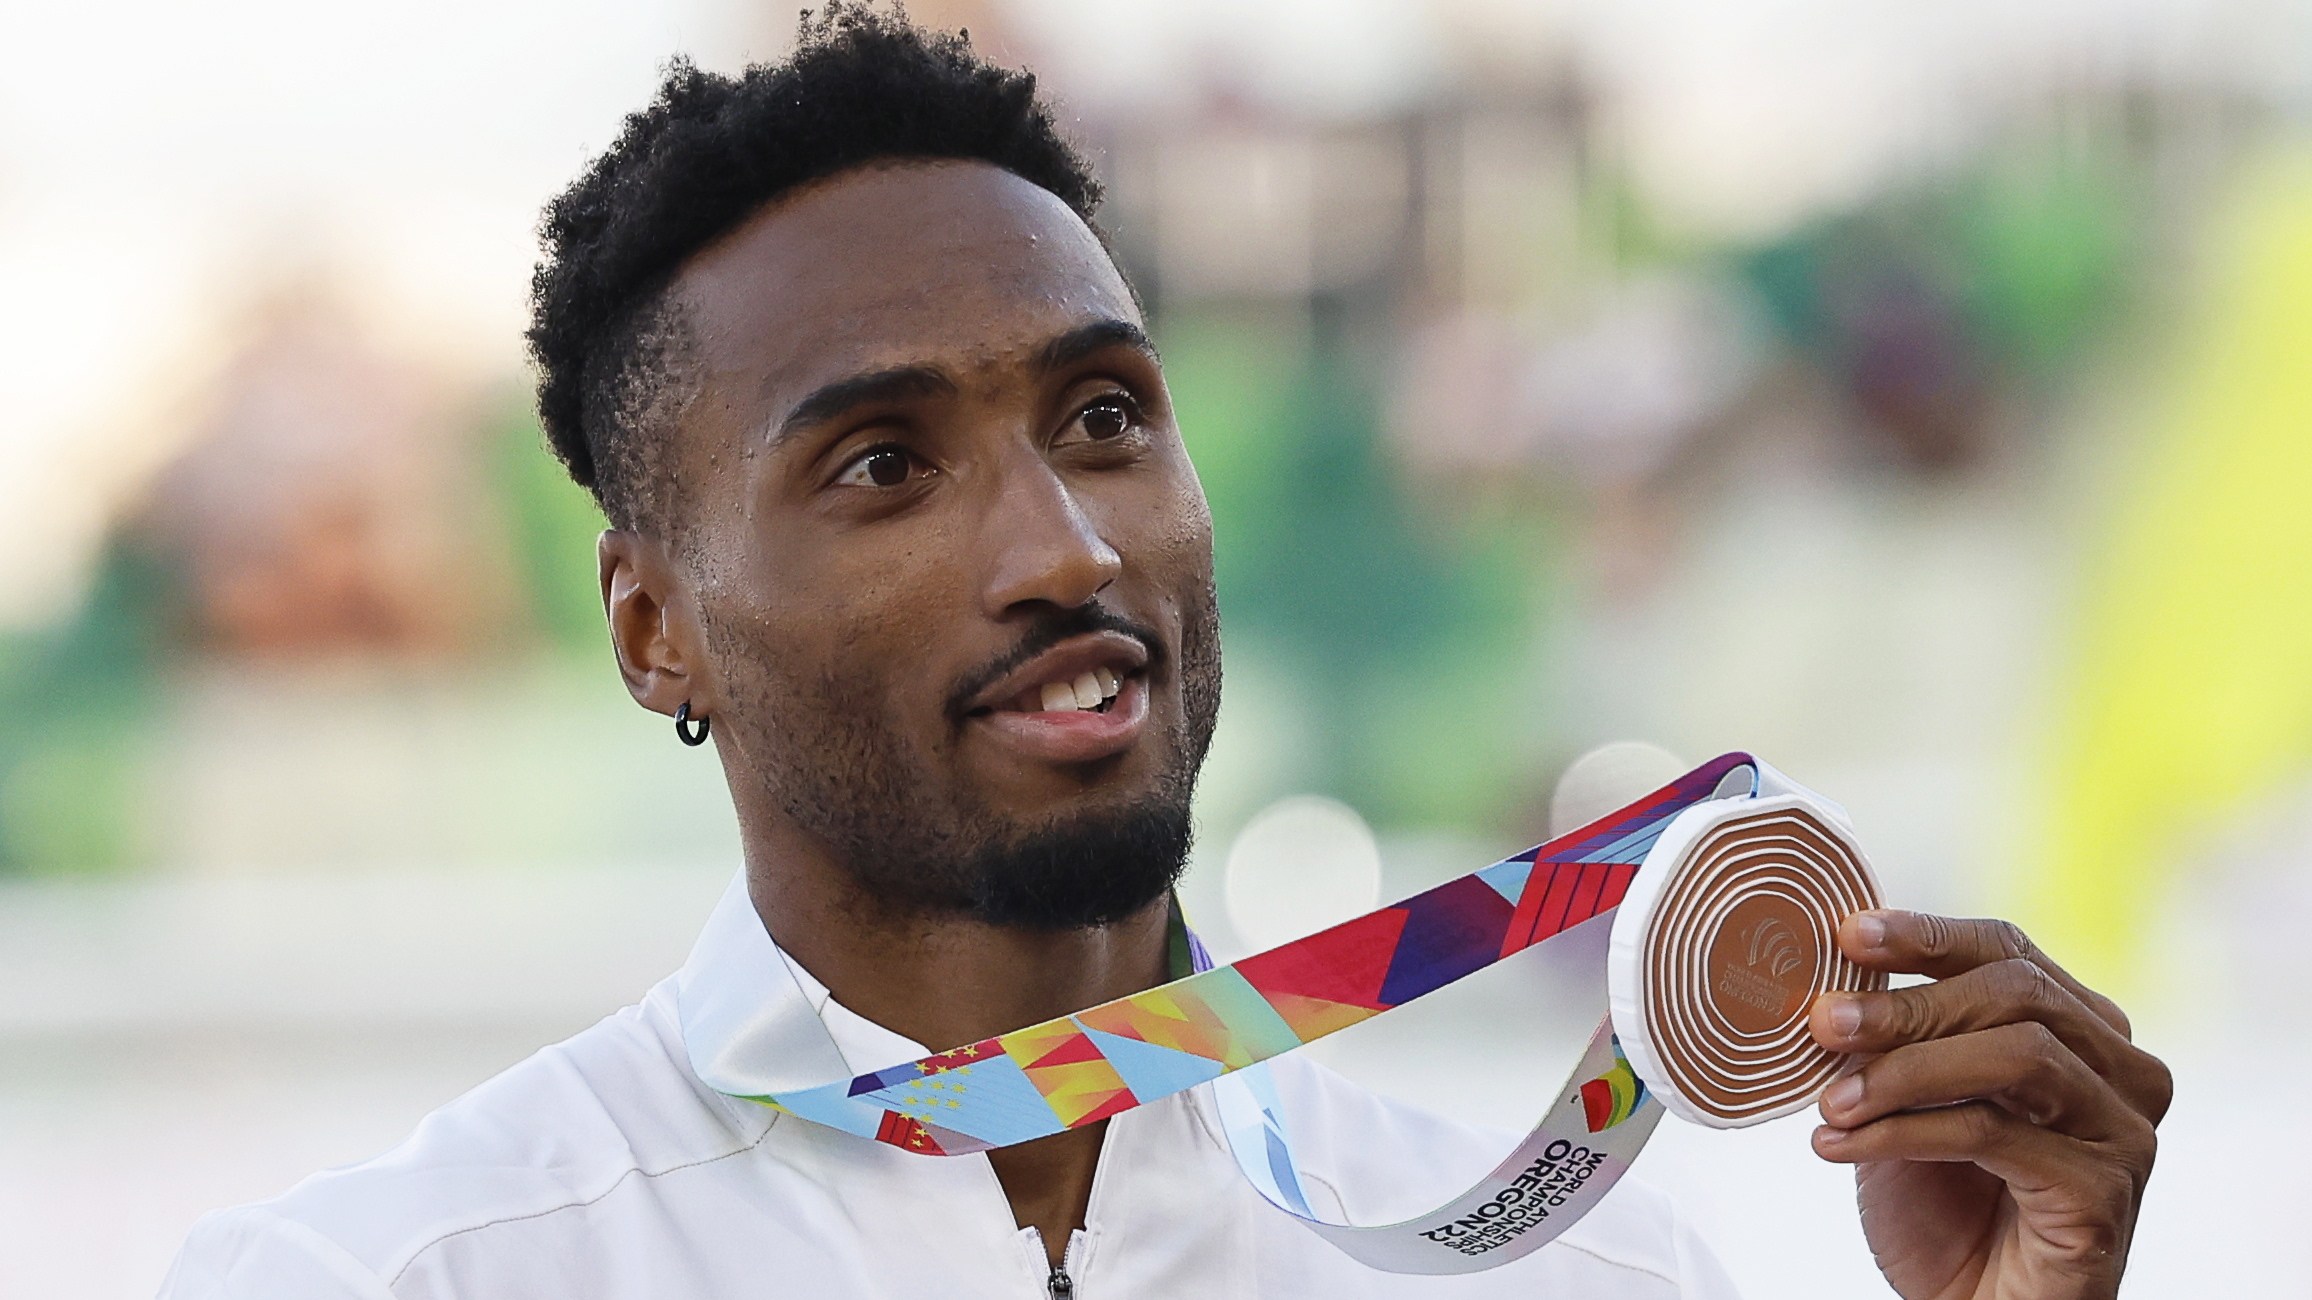 Hudson-Smith overcomes suicide attempt to win world 400m bronze